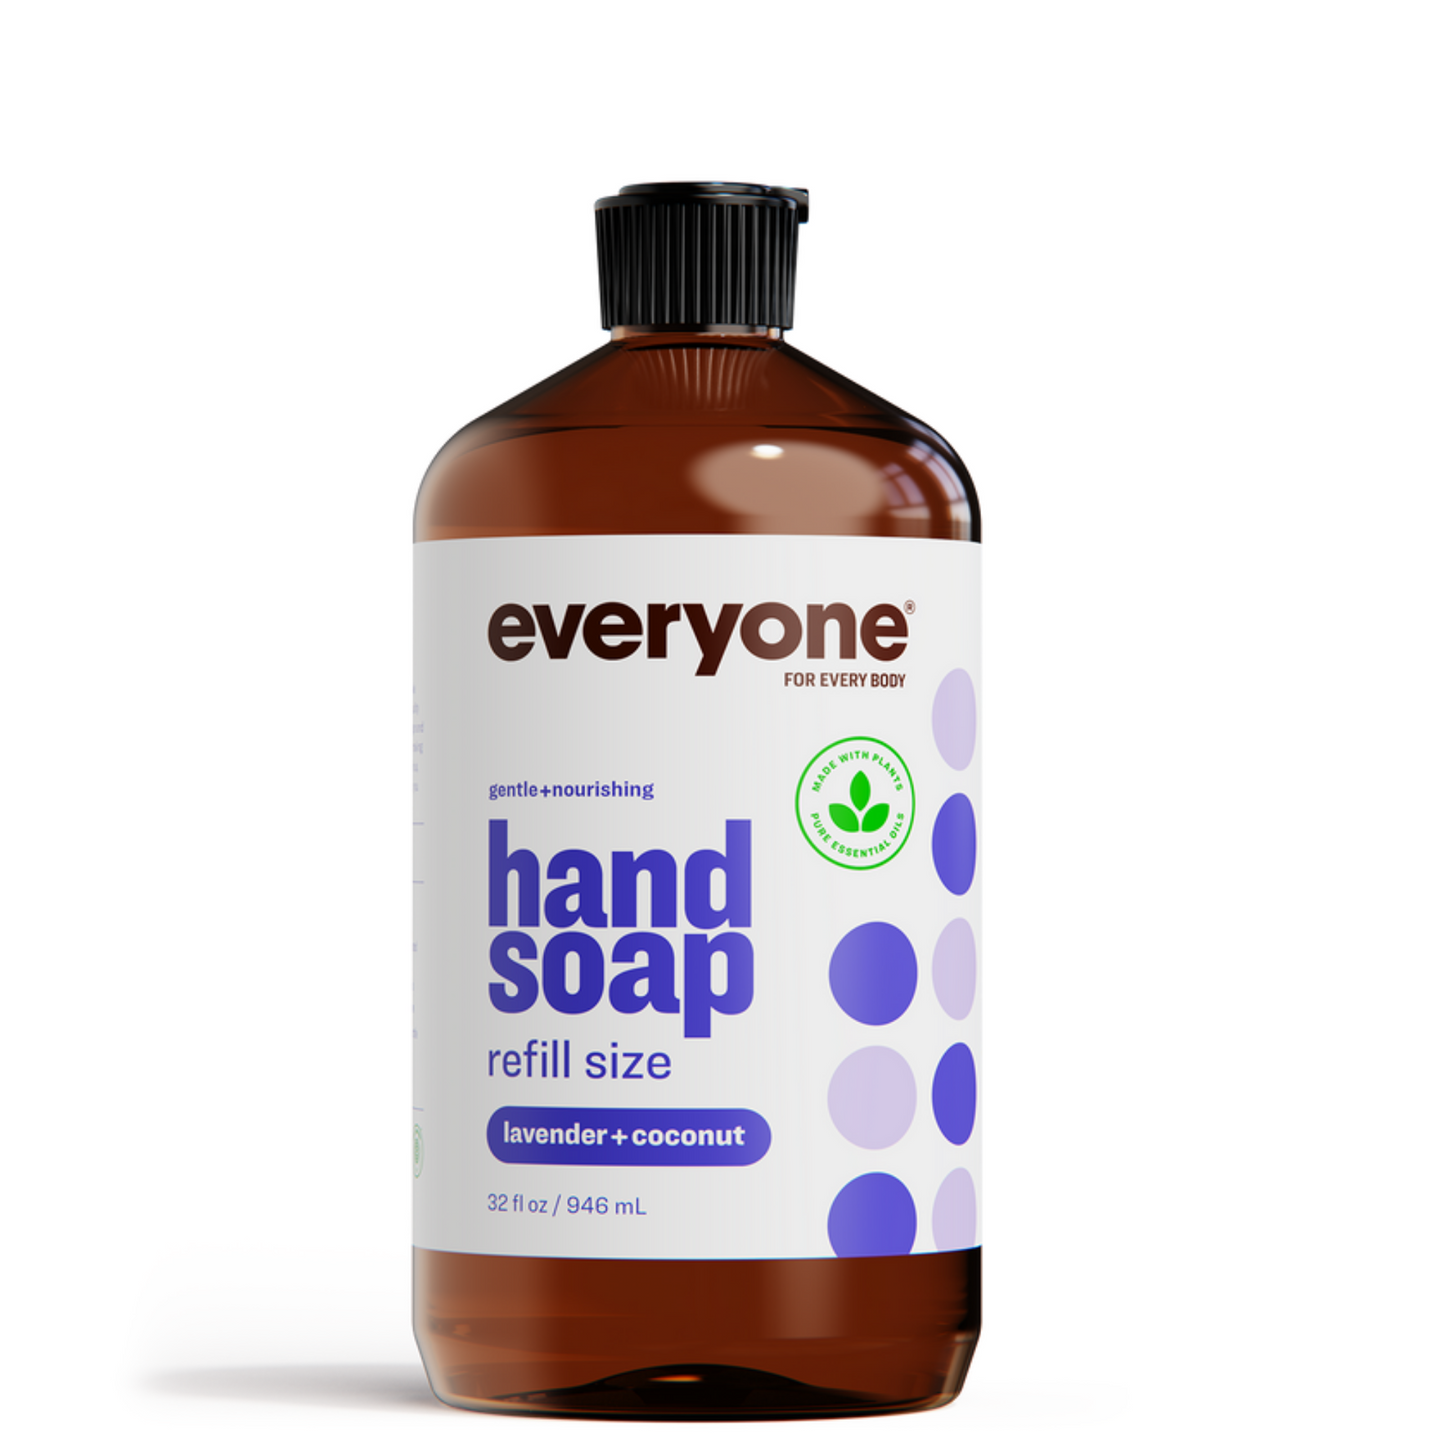 Primary Image of Lavender & Coconut hand soap refill